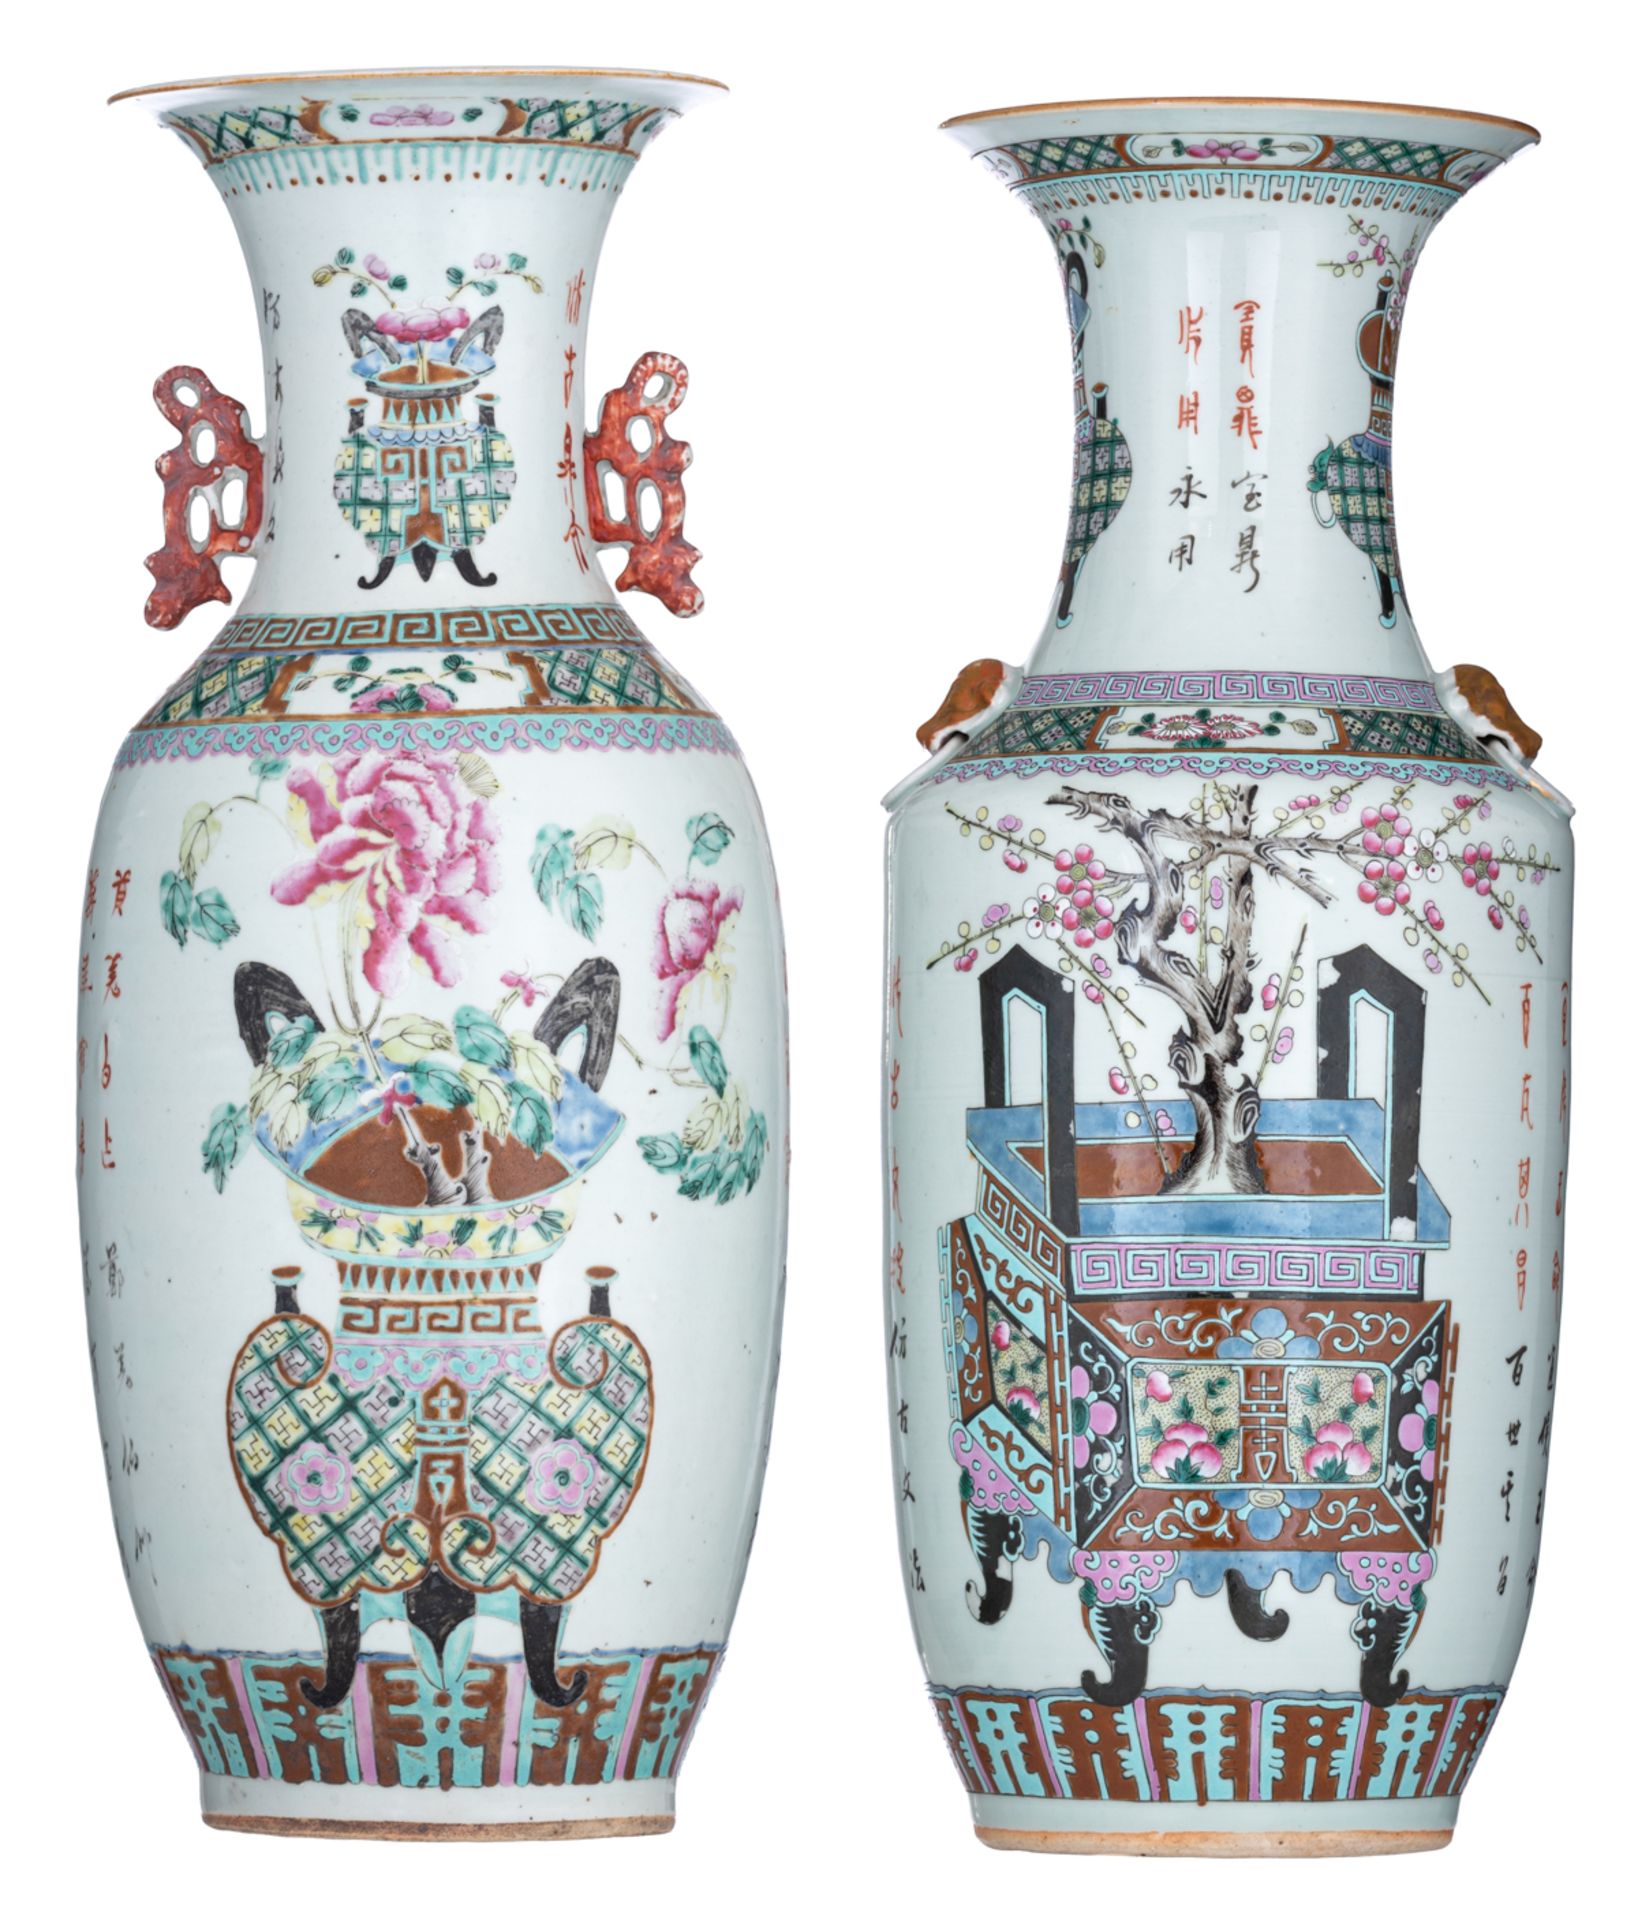 Two Chinese famille rose vases, decorated with flowers, flower baskets and calligraphic texts, H 57,